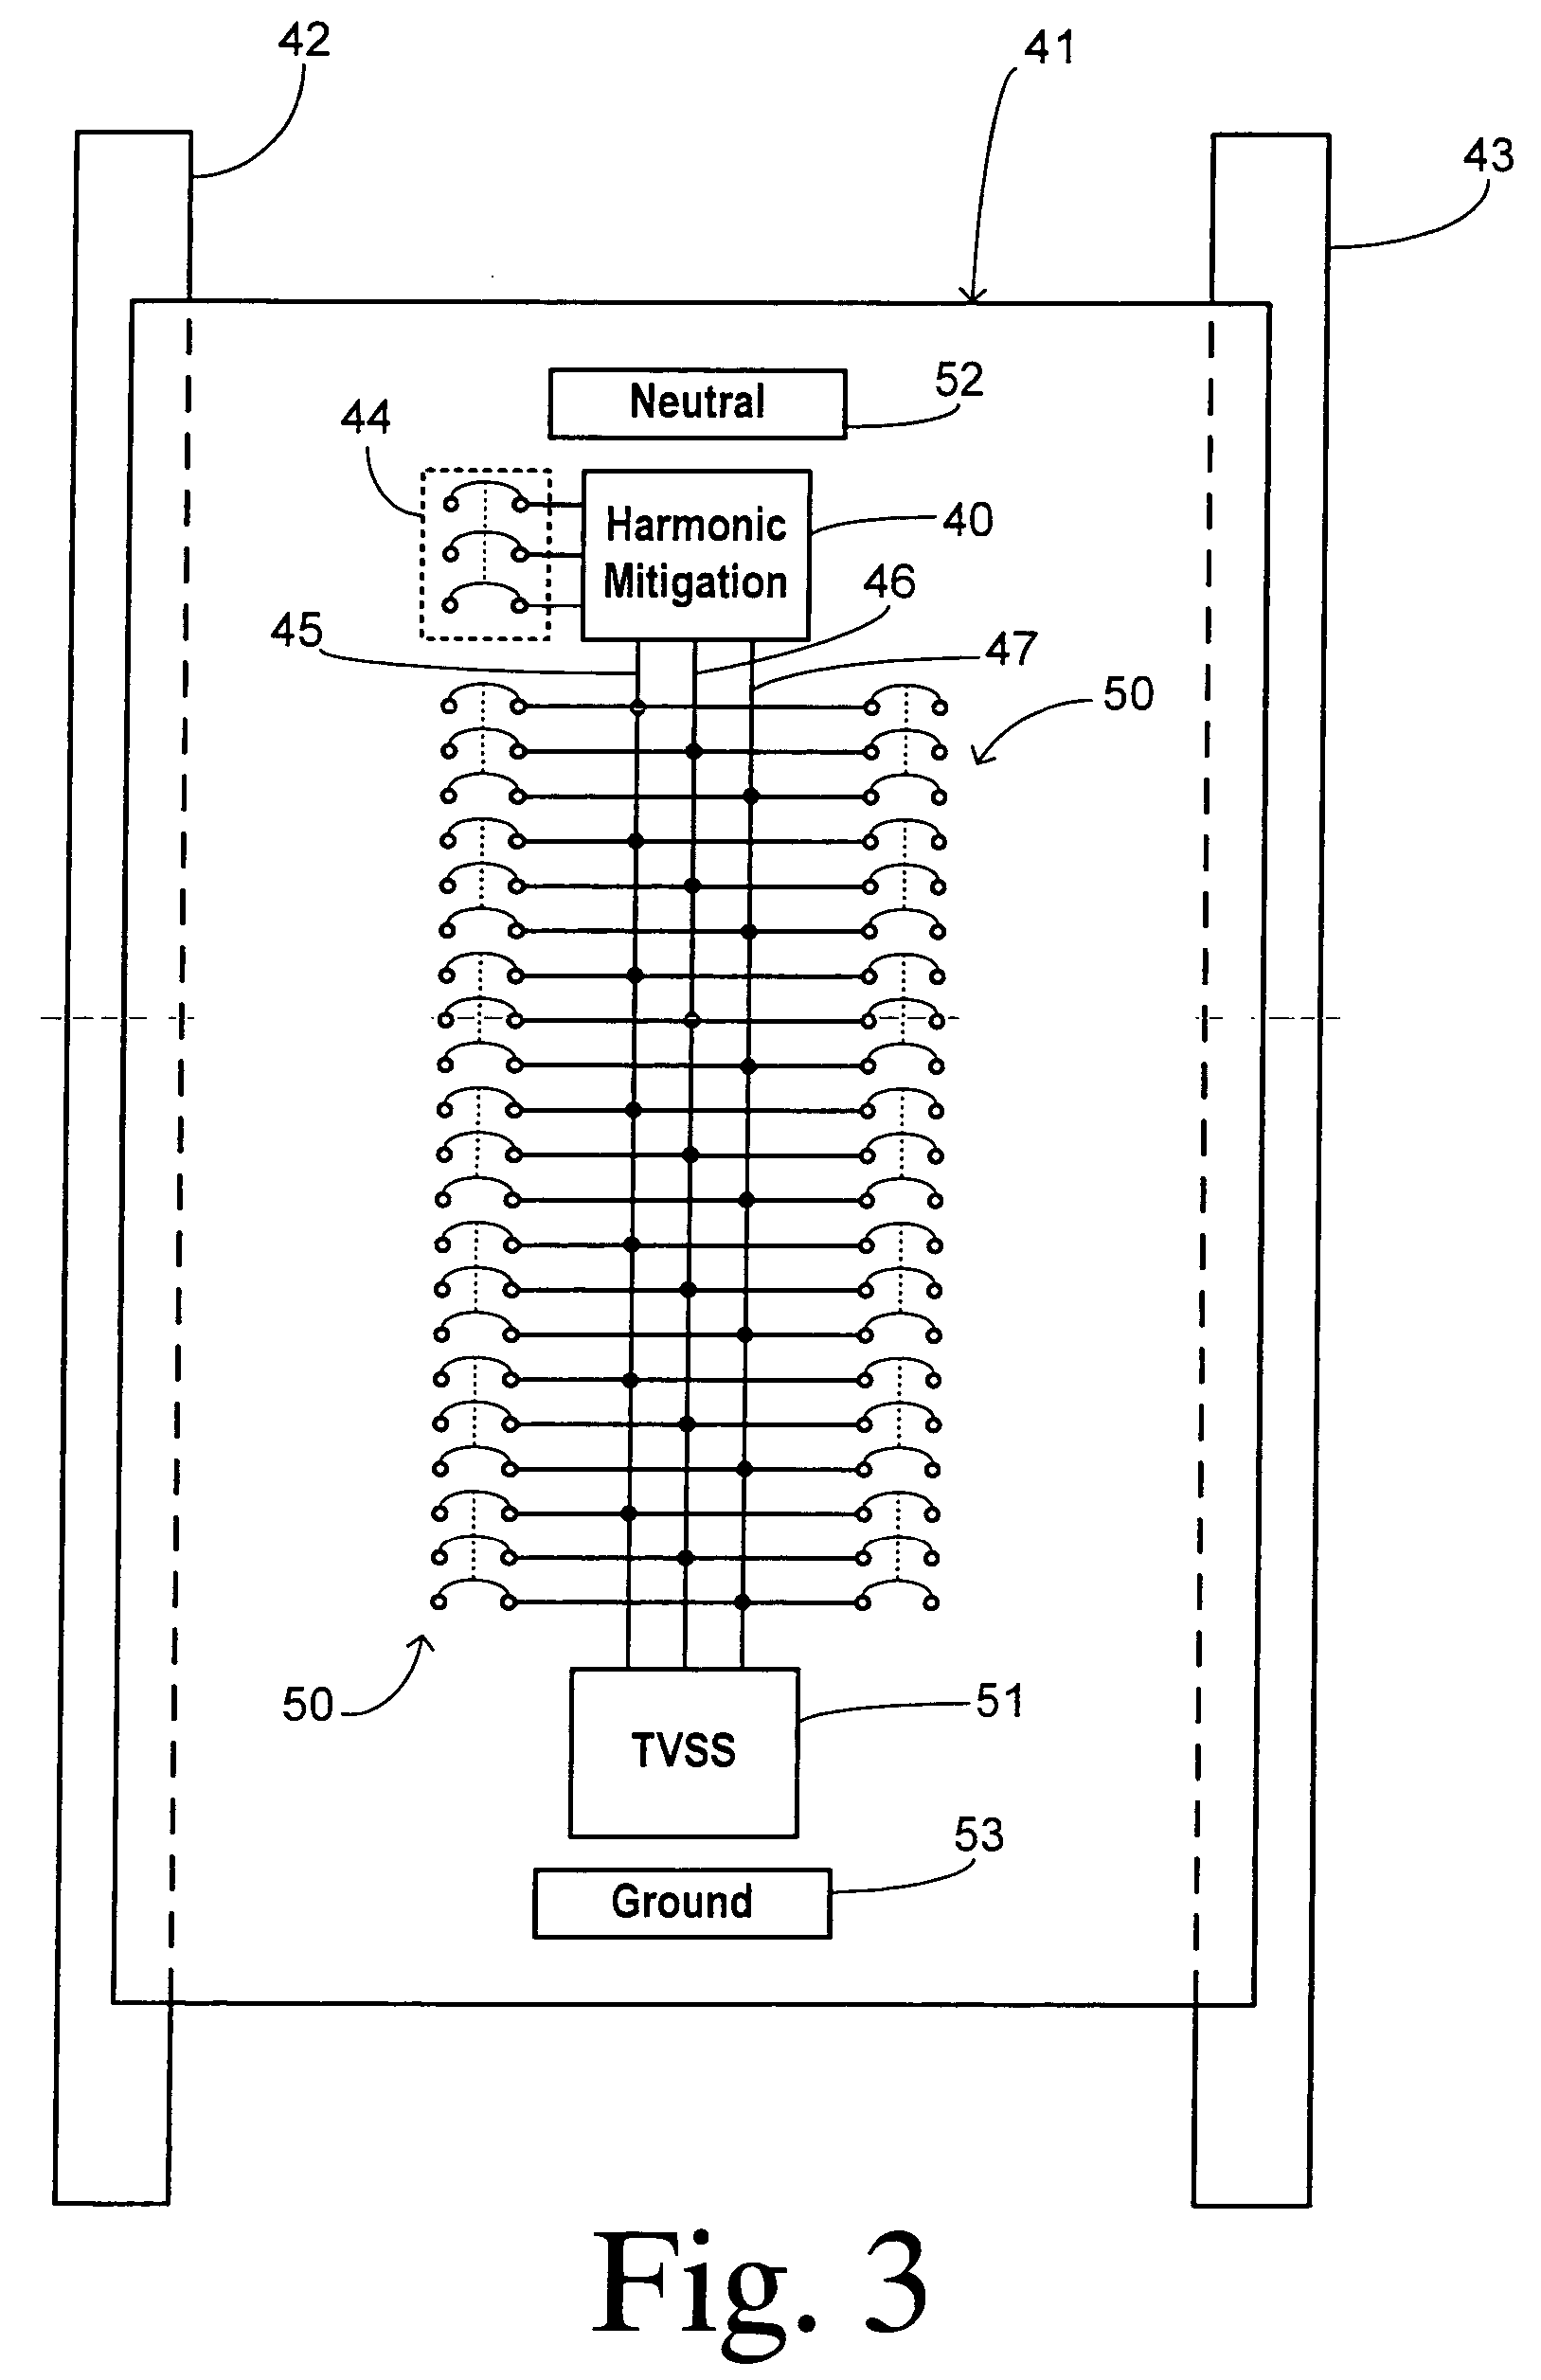 AC power distribution system with transient suppression and harmonic attenuation